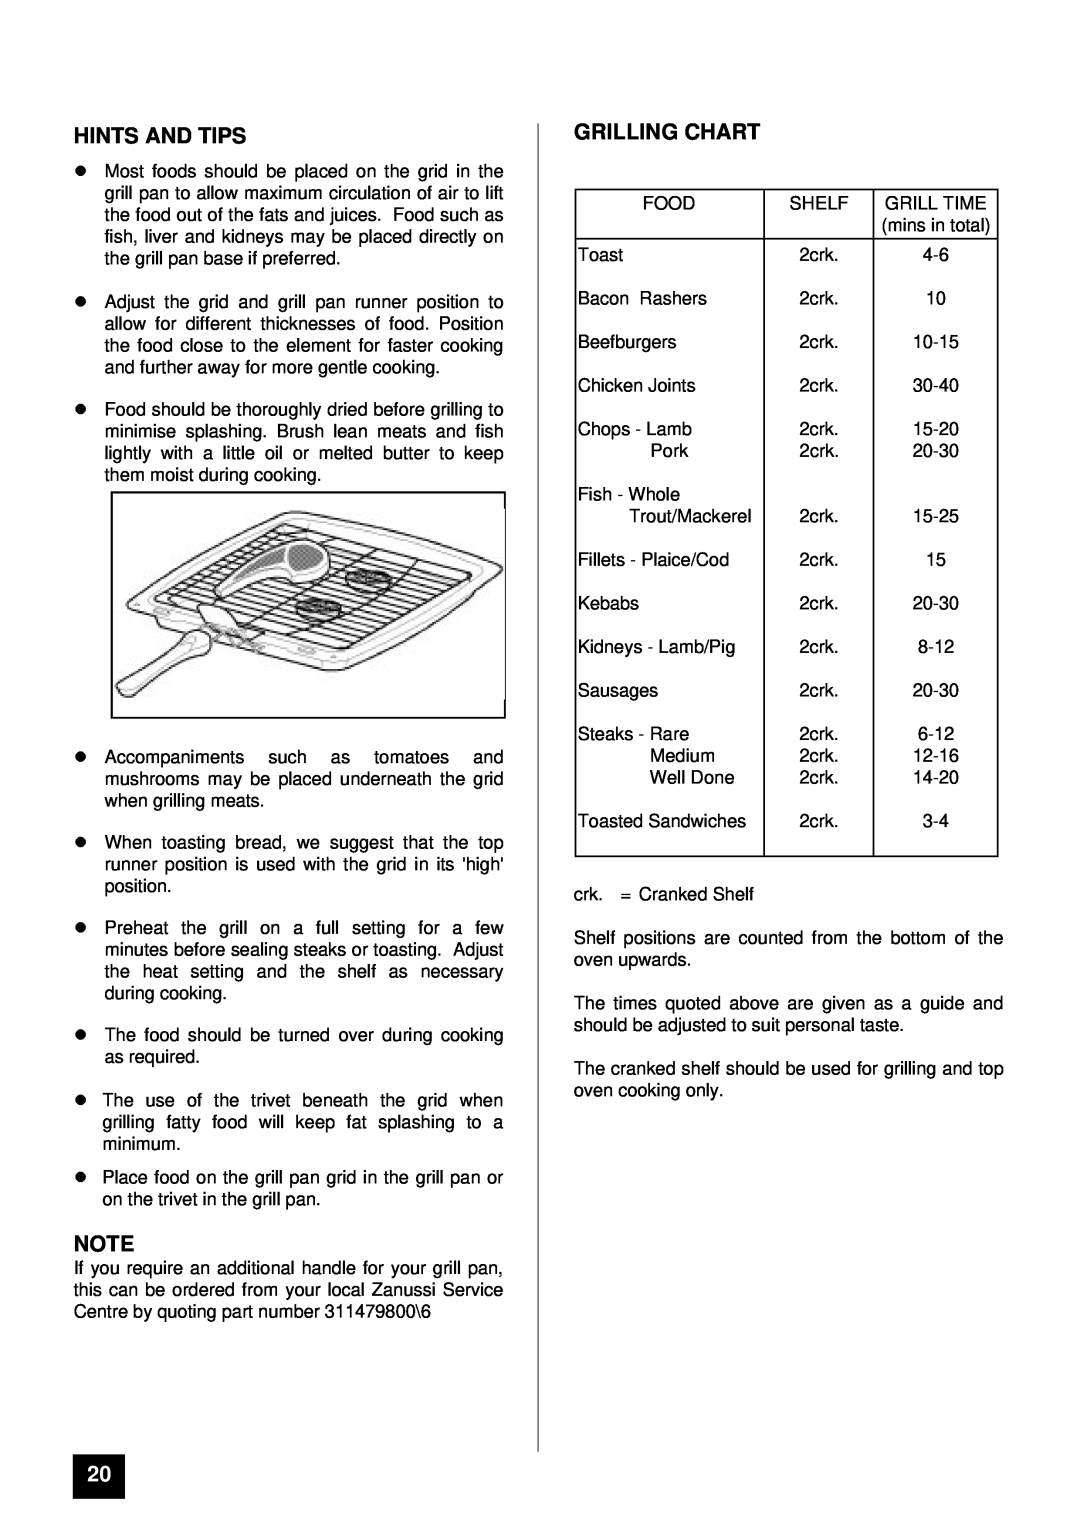 Zanussi ZDF867X manual Hints And Tips, Grilling Chart 